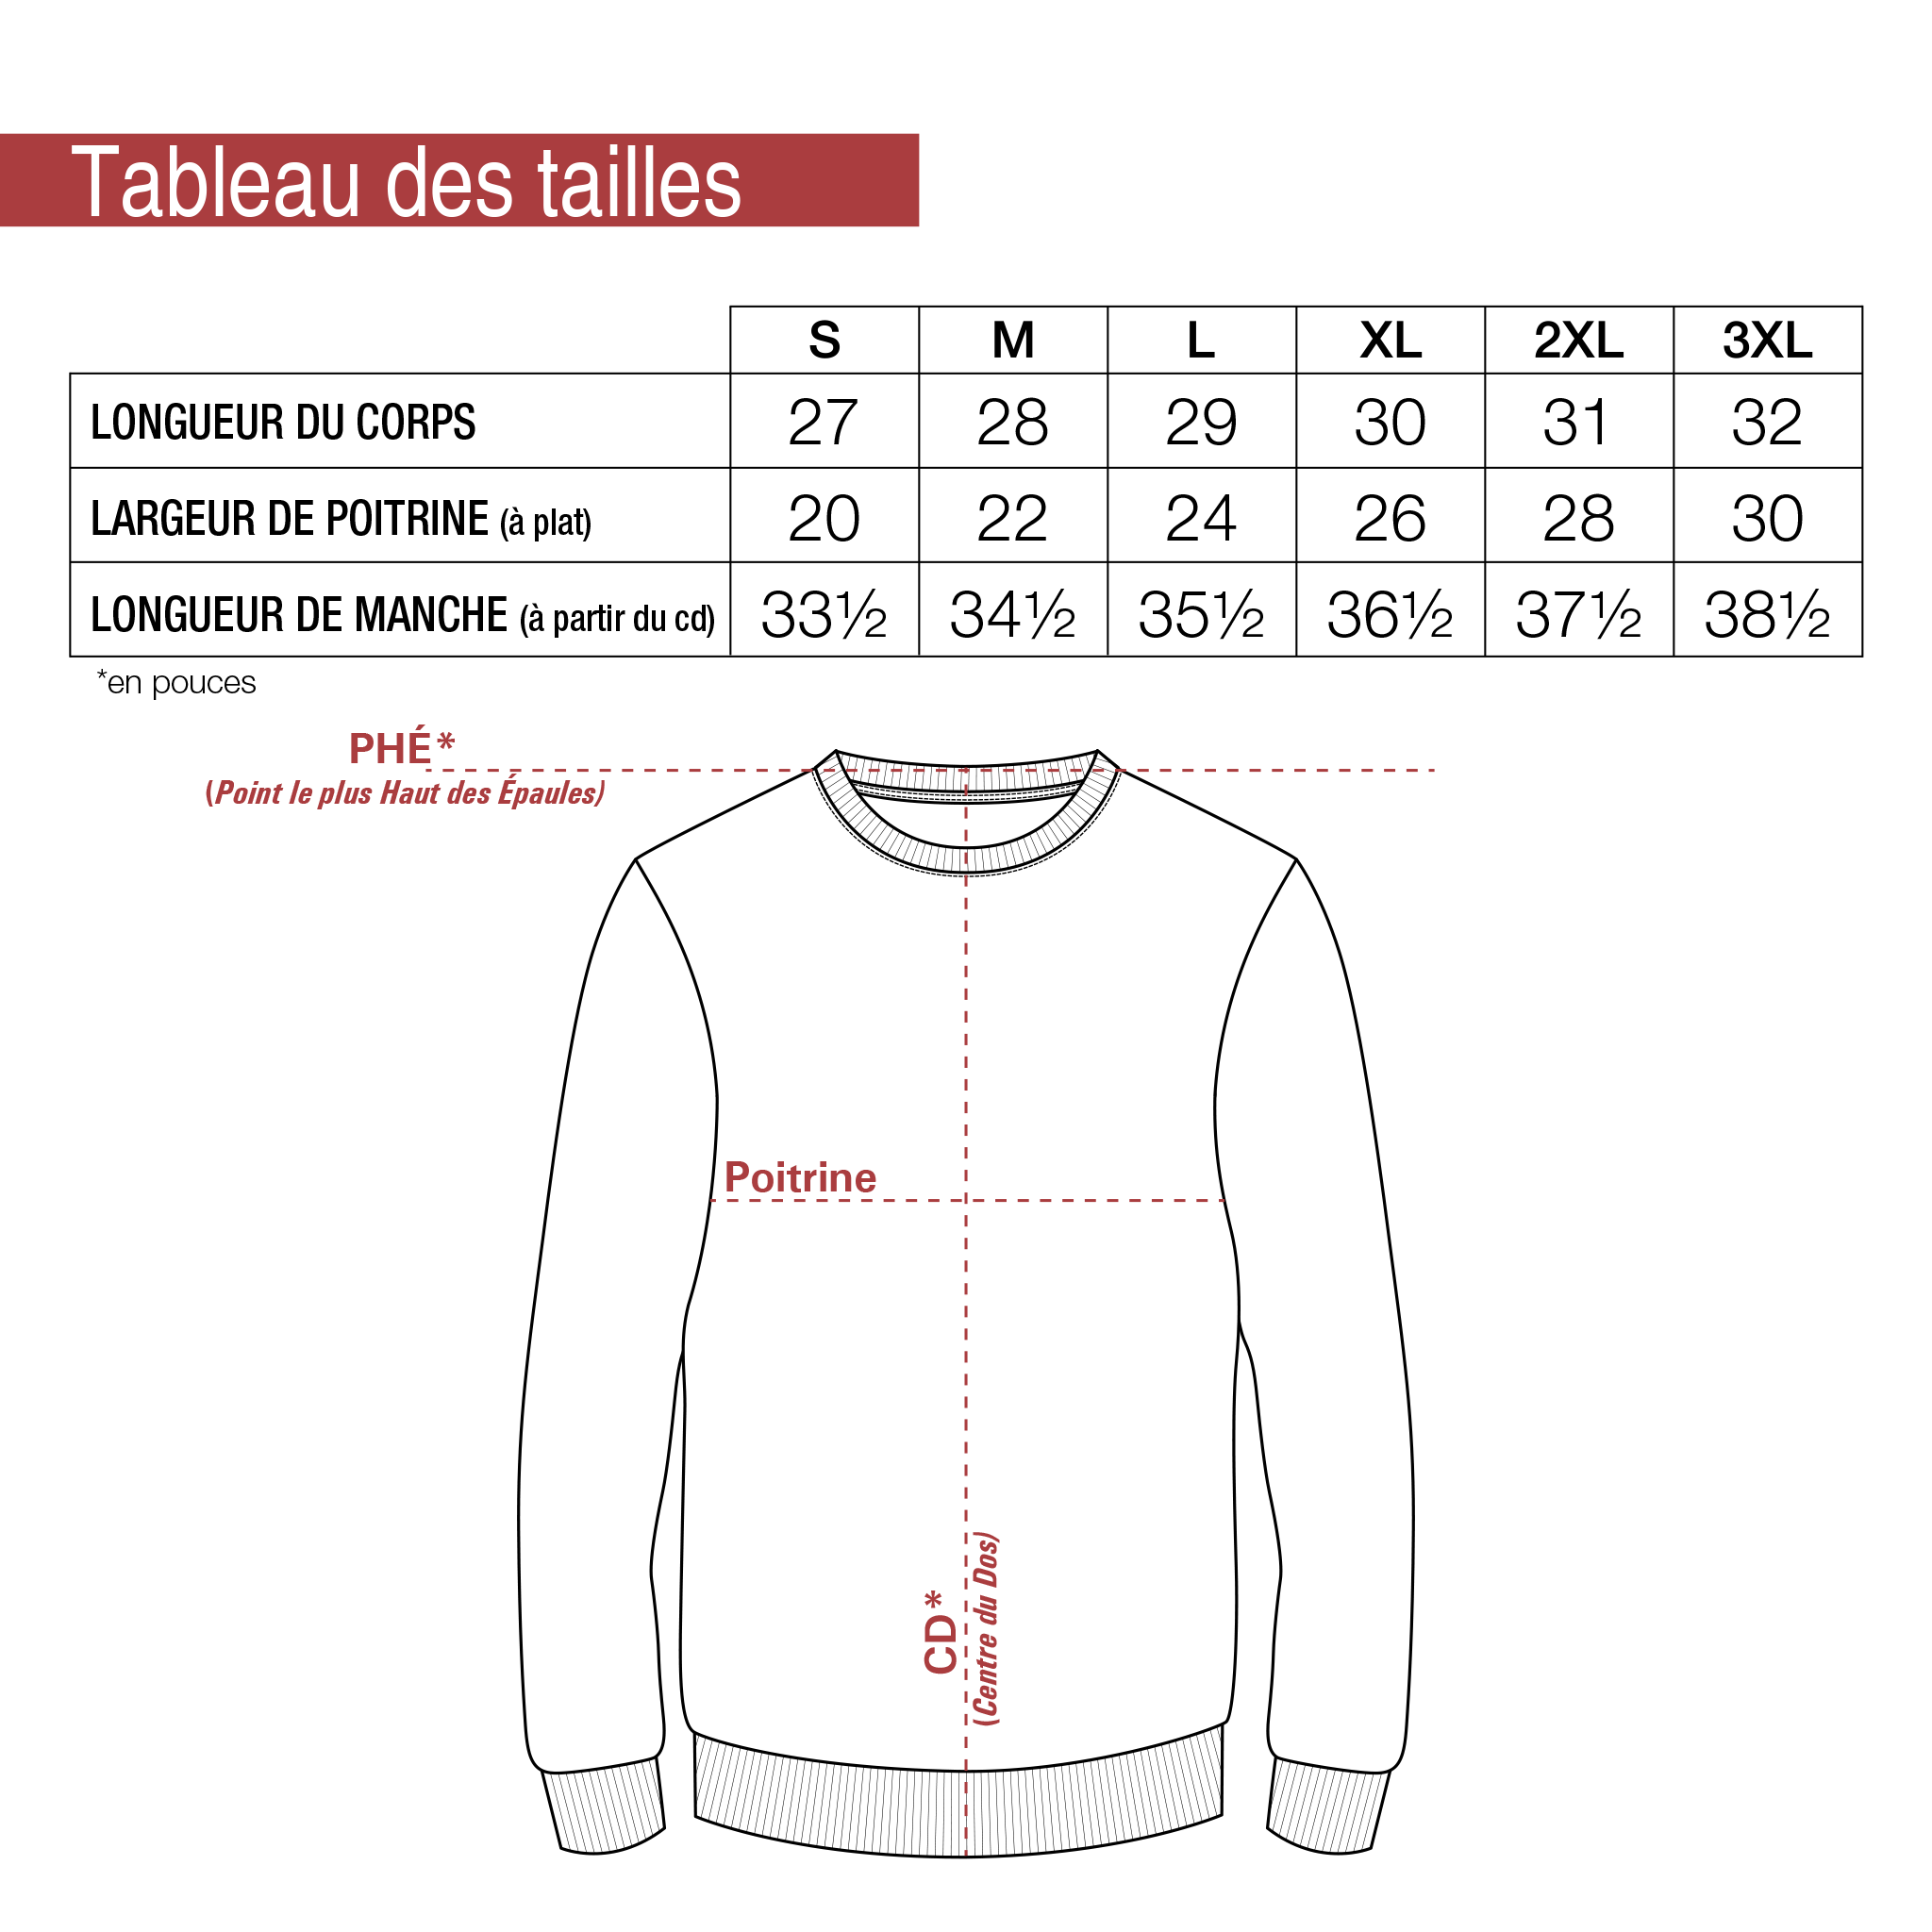 Tableau-taille-18000_0f794e2e-a135-4fb7-81b2-5736f7f7c028.png